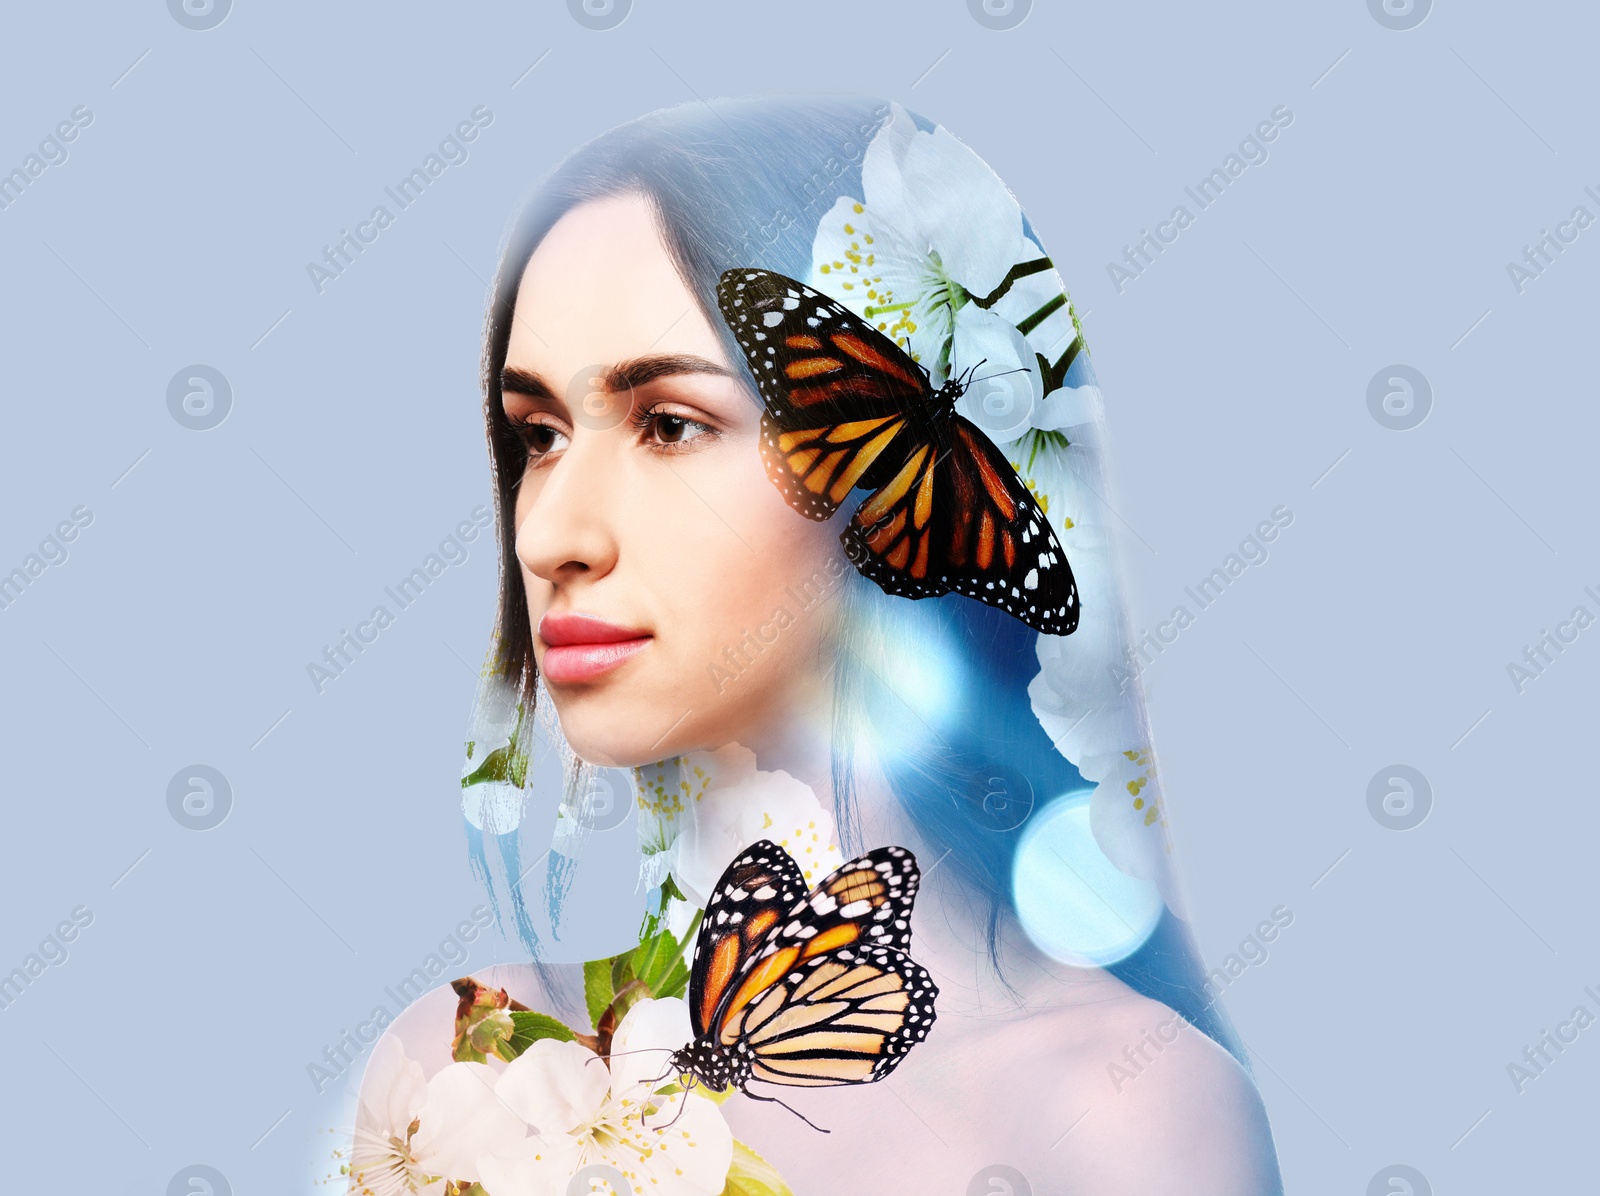 Image of Double exposure of beautiful woman, blooming flowers and butterflies on light blue background